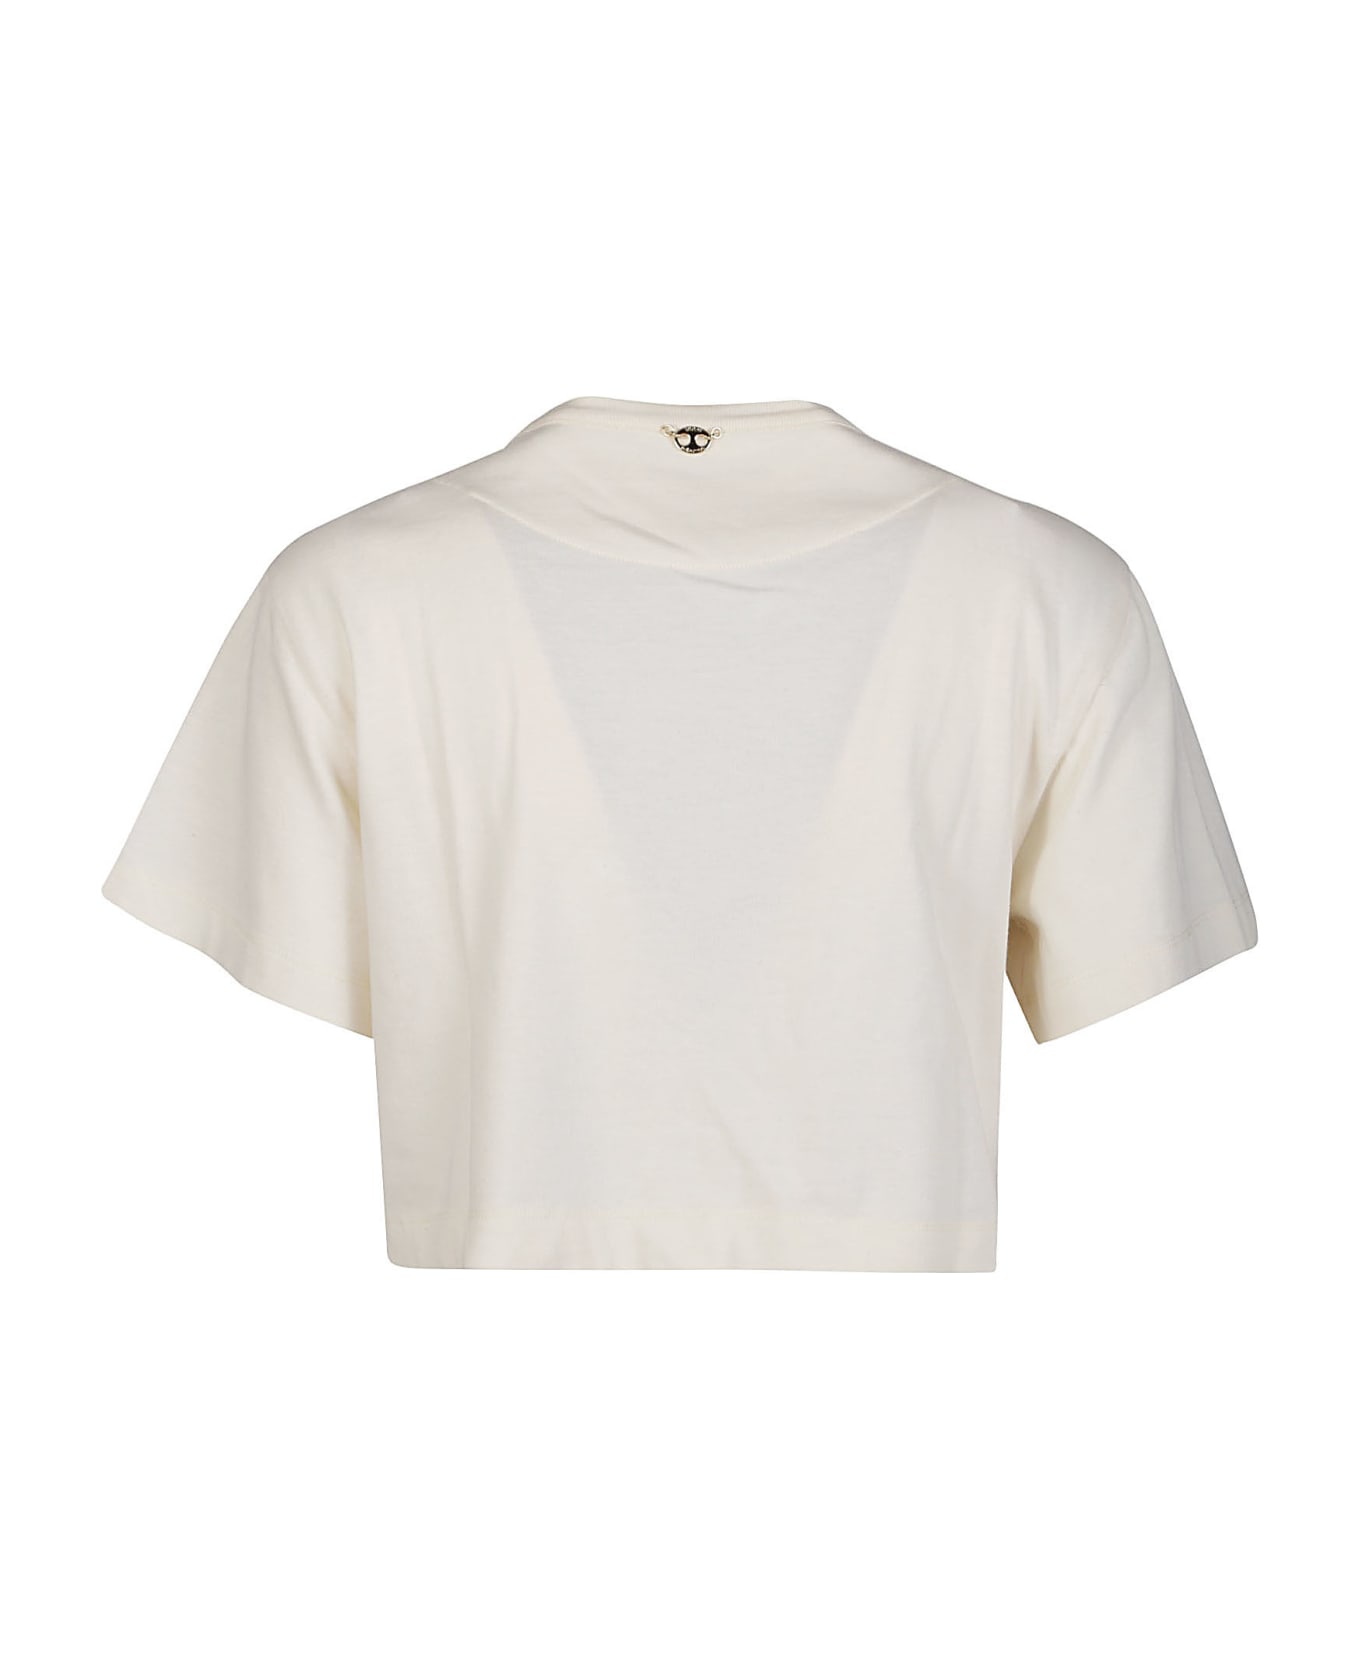 Paco Rabanne Cropped T-shirt - Nude